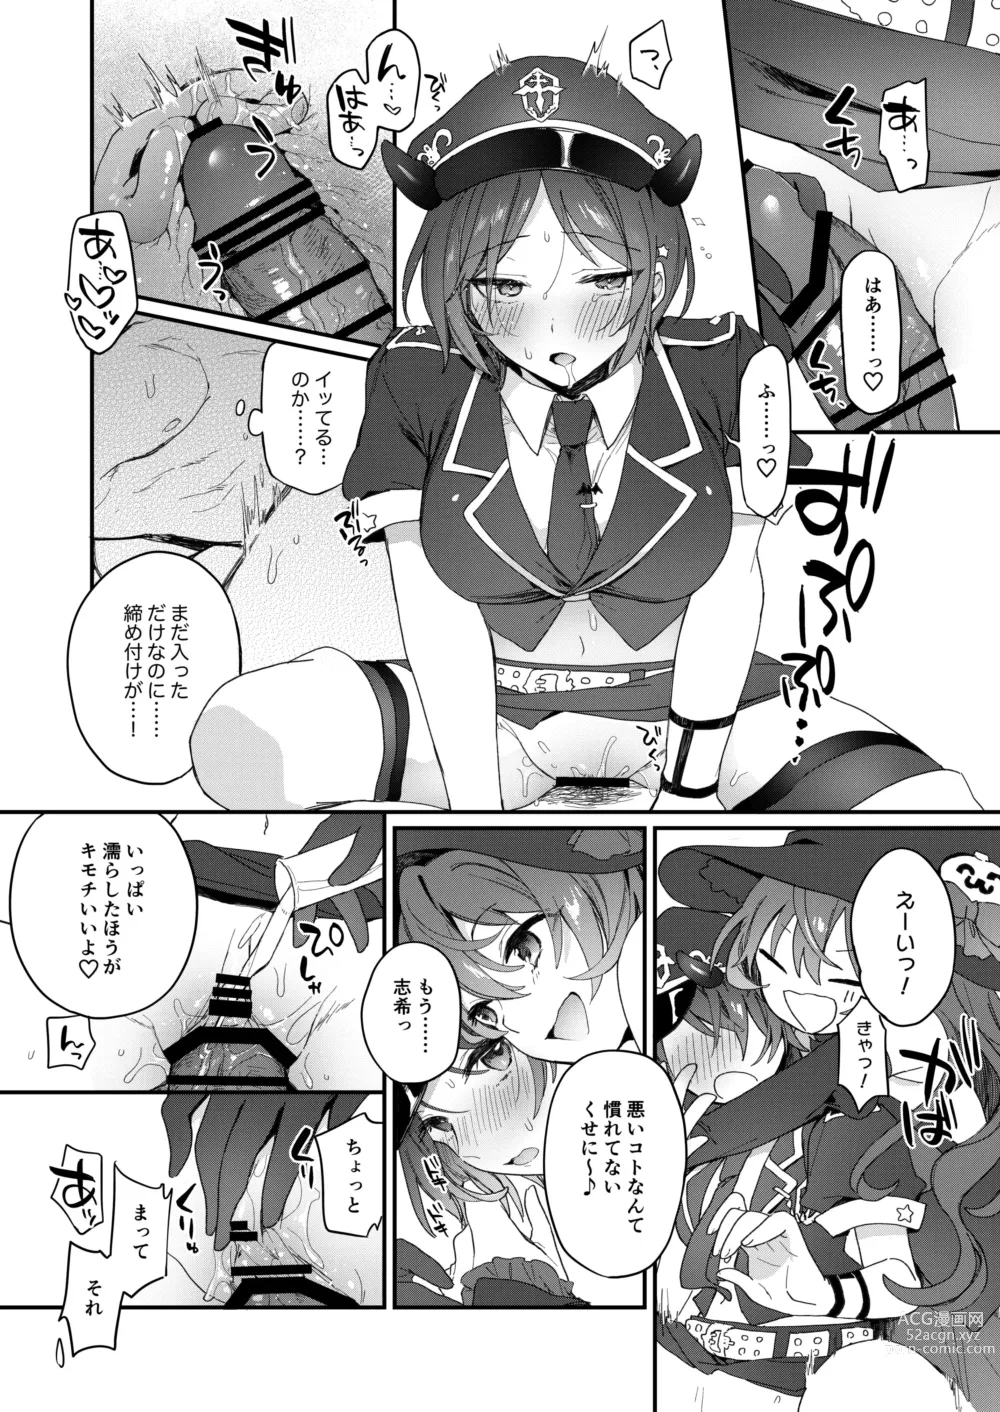 Page 15 of doujinshi Harem Halloween Party